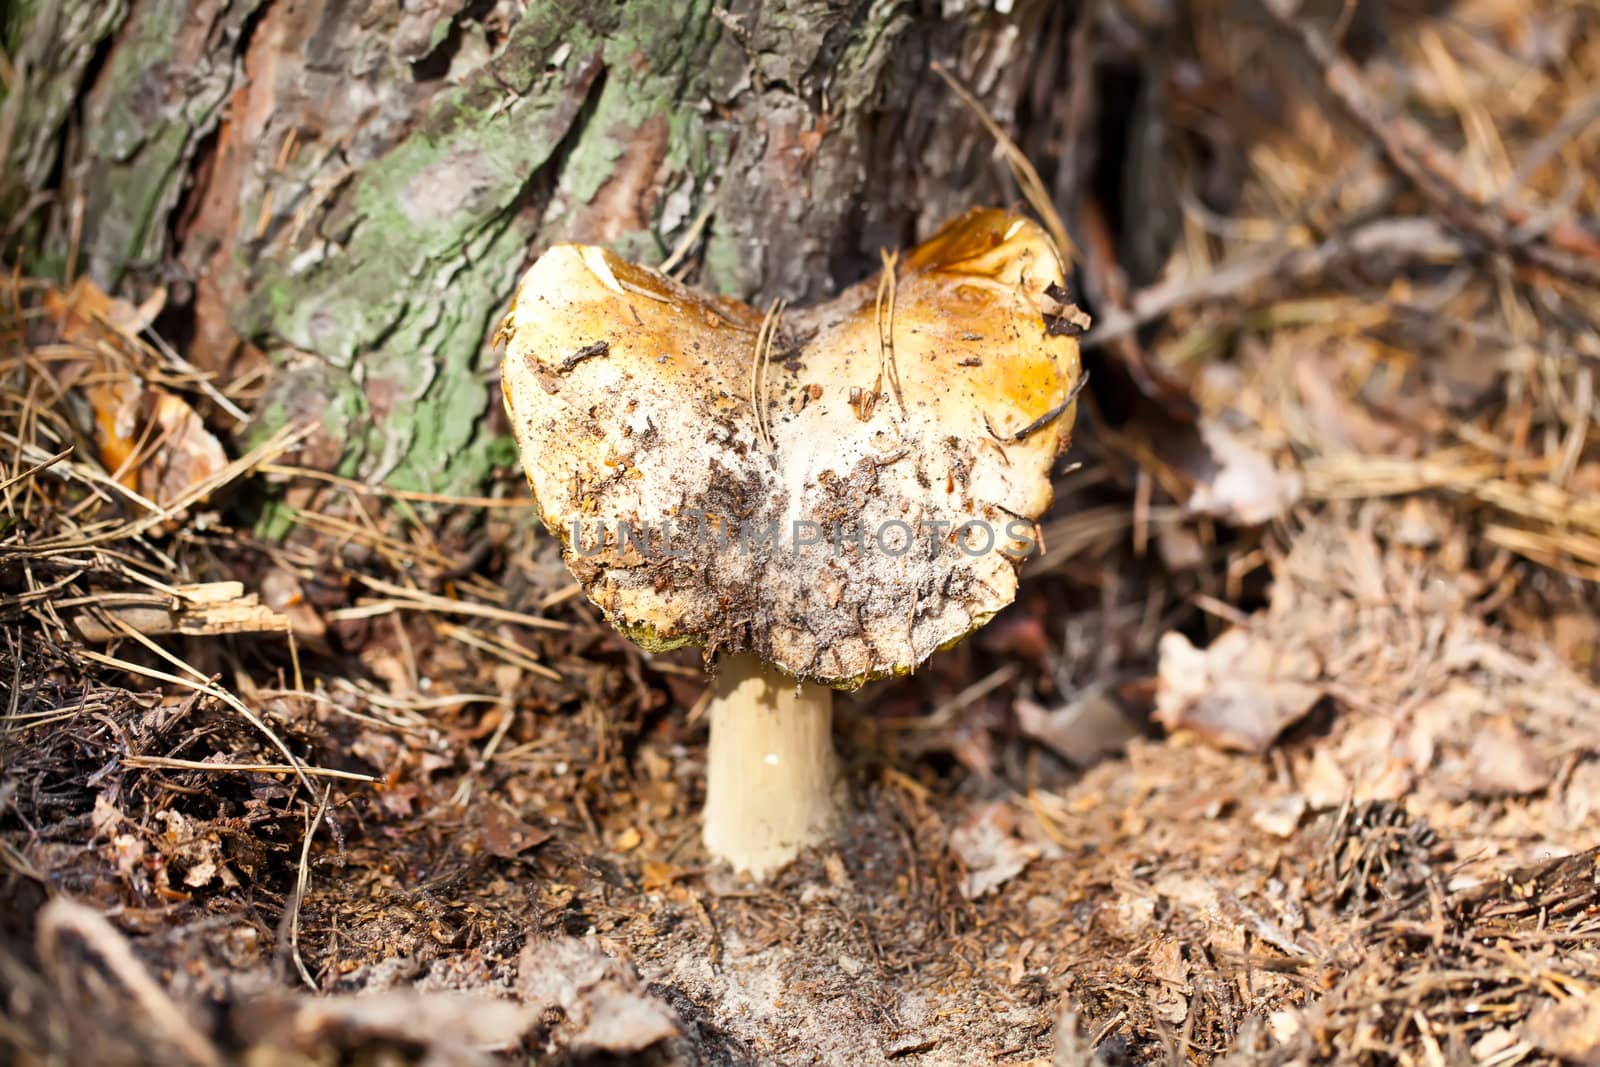 Poisonous mushroom in forest under tree